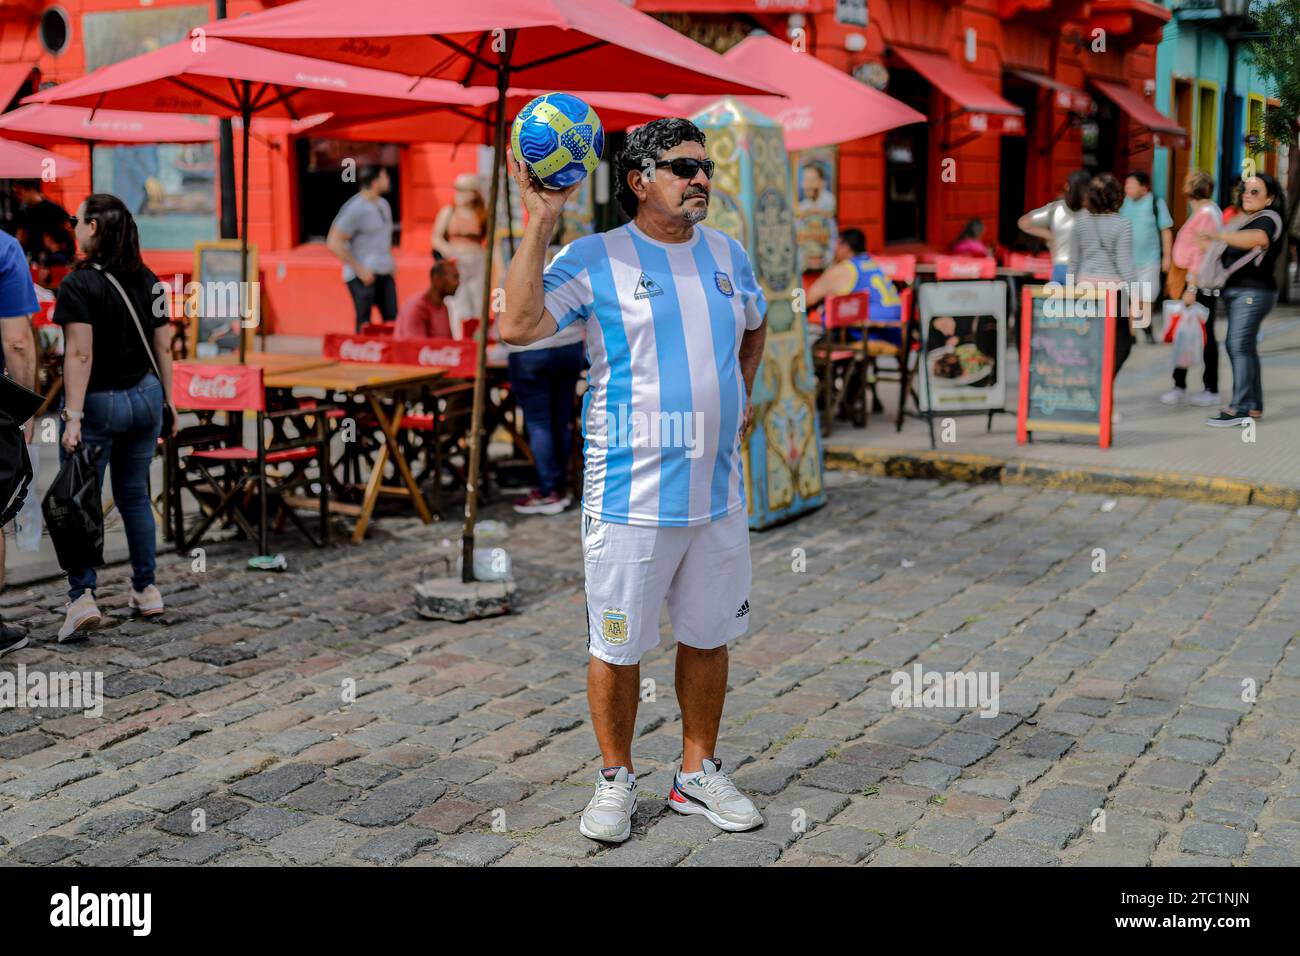 A man dressed as the late Argentine soccer player, Diego Maradona, walks through the 'caminitos' sector before the change of government amid economic and social upheaval. President-elect Javier Milei of La Libertad Avanza, a far-right libertarian who burst onto the Argentine political scene with eccentric and radical proposals, will take office on Sunday, December 10, replacing incumbent Peronist Alberto Fernández. Milei describes himself as an 'anarcho-capitalist' libertarian who wants to drastically reduce the size of the state and replace the local peso with the US dollar. The new administr Stock Photo